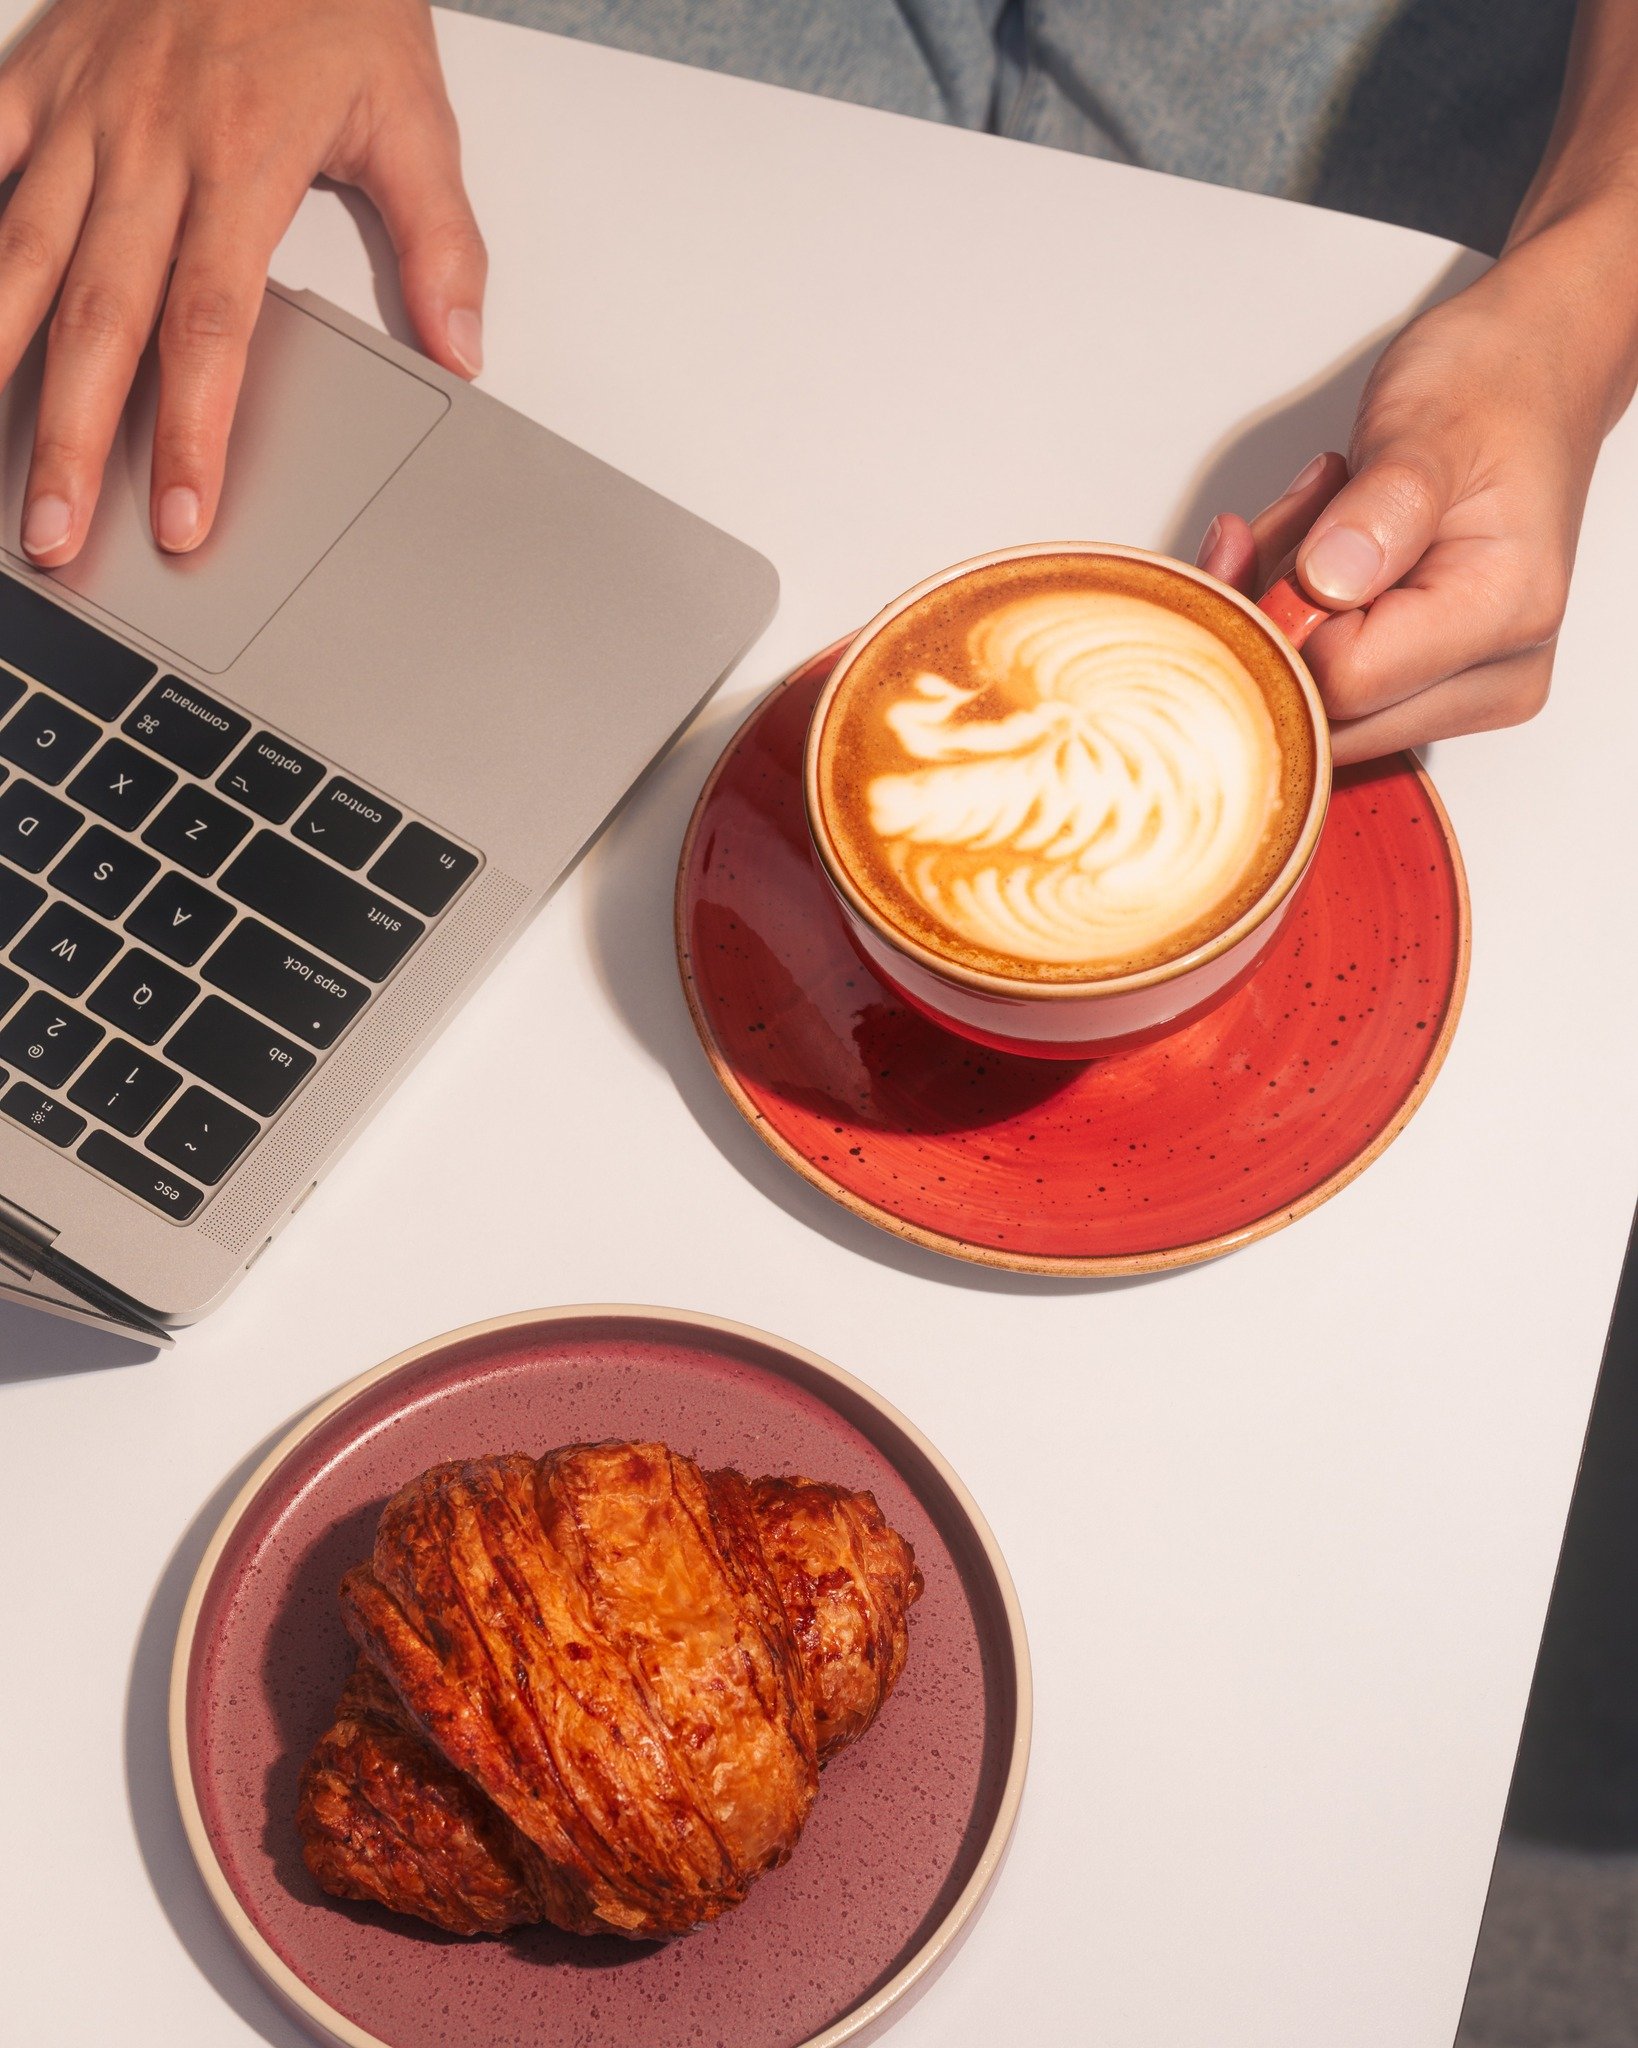 Need a change of environment to beat the Monday blues?

Escape the hustle and bustle and find your perfect work spot at our cafe.

Grab a cup of coffee, settle in, and tackle your to-do list in style.

#flamingocoffeebarsg